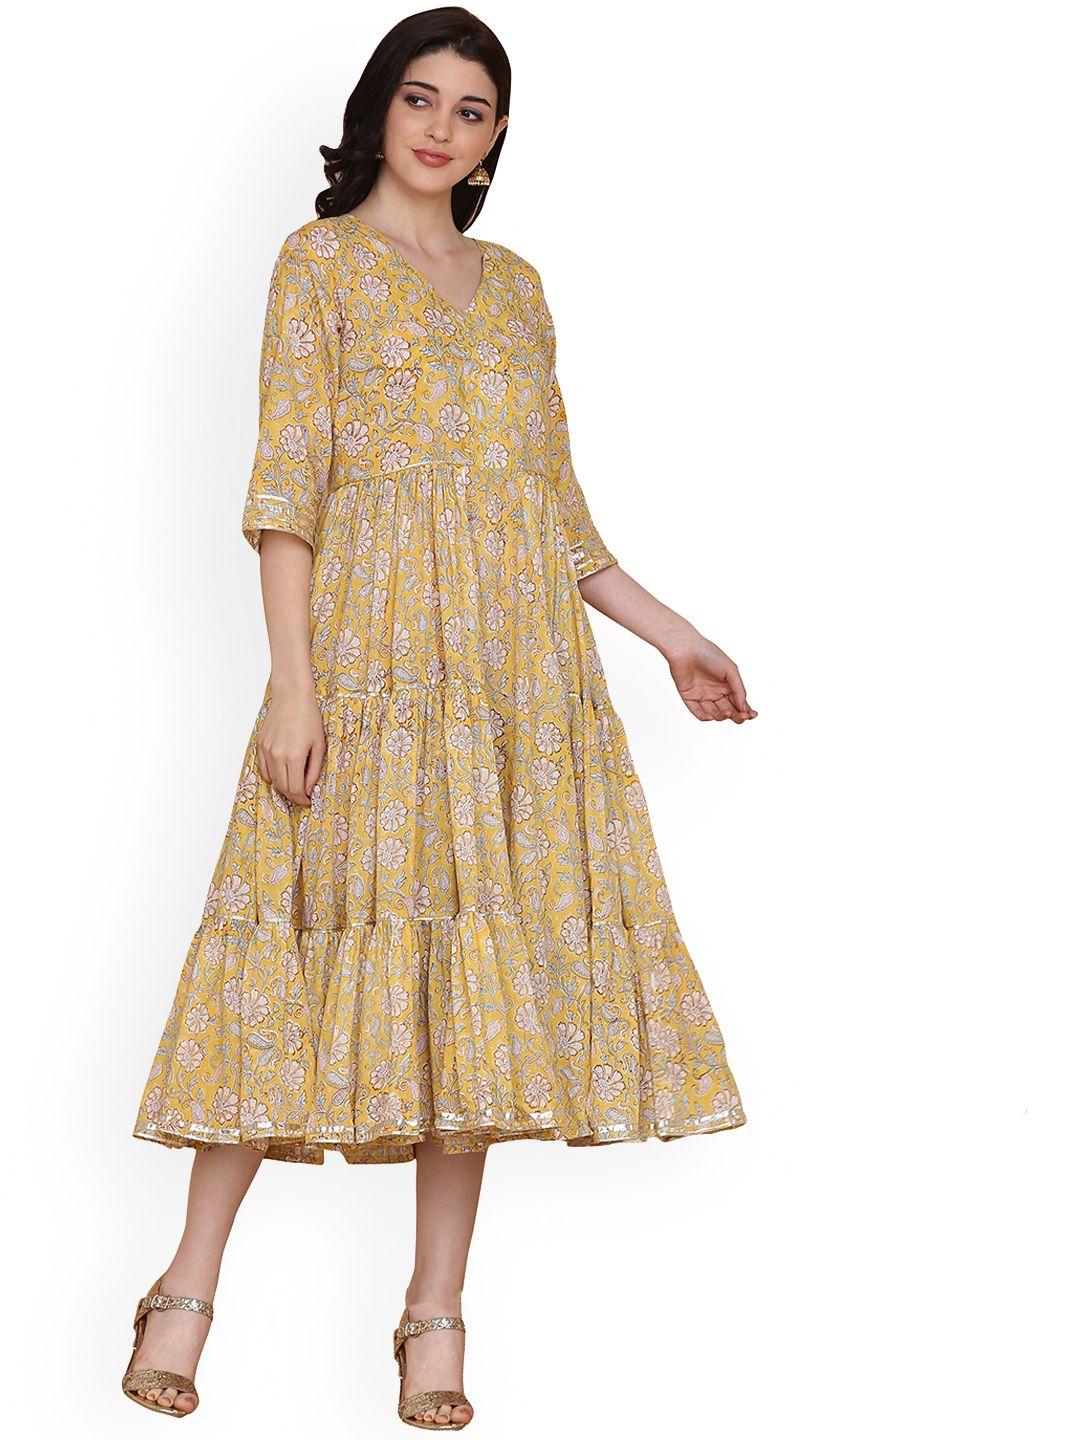 kalini-floral-printed-pure-cotton-ethnic-dress